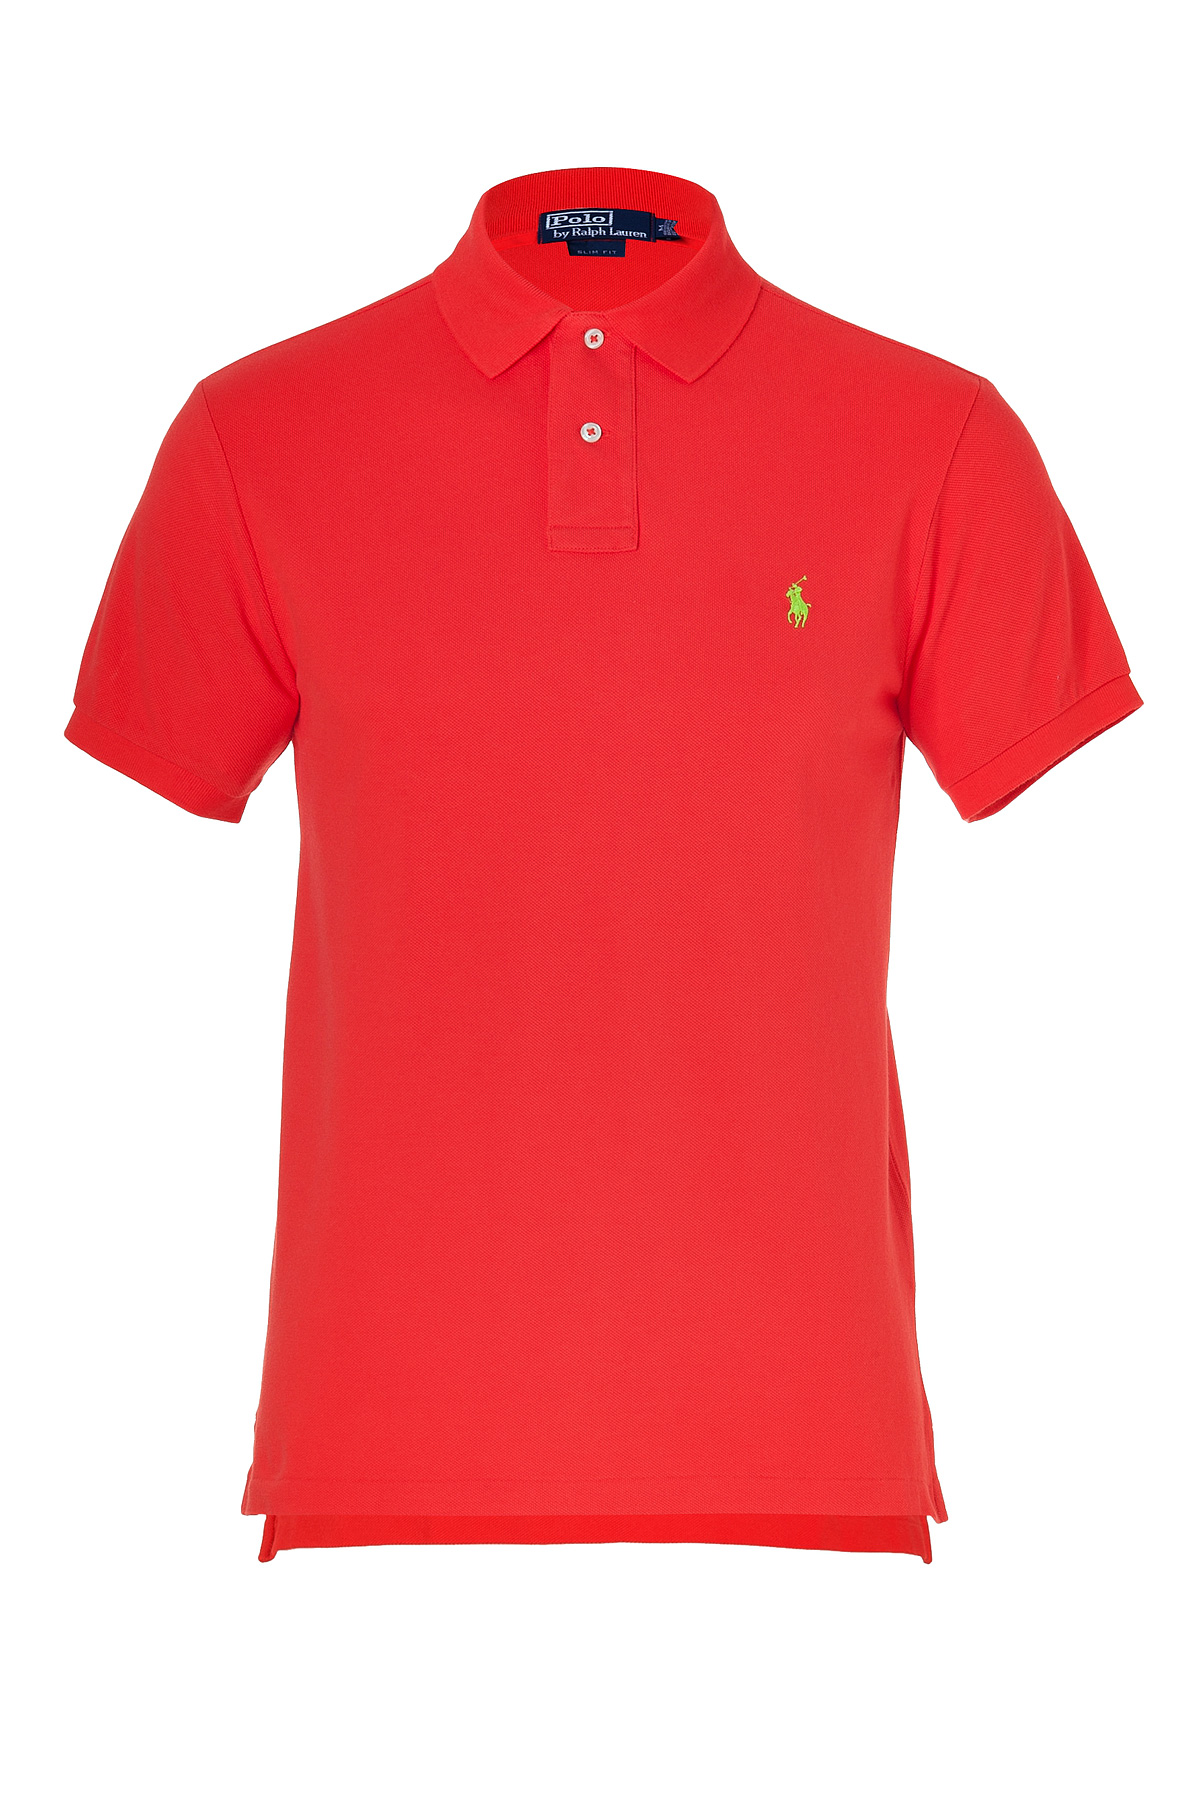 Ralph lauren Tomato Cotton Mesh Slim Fit Polo Shirt in Red for Men ...